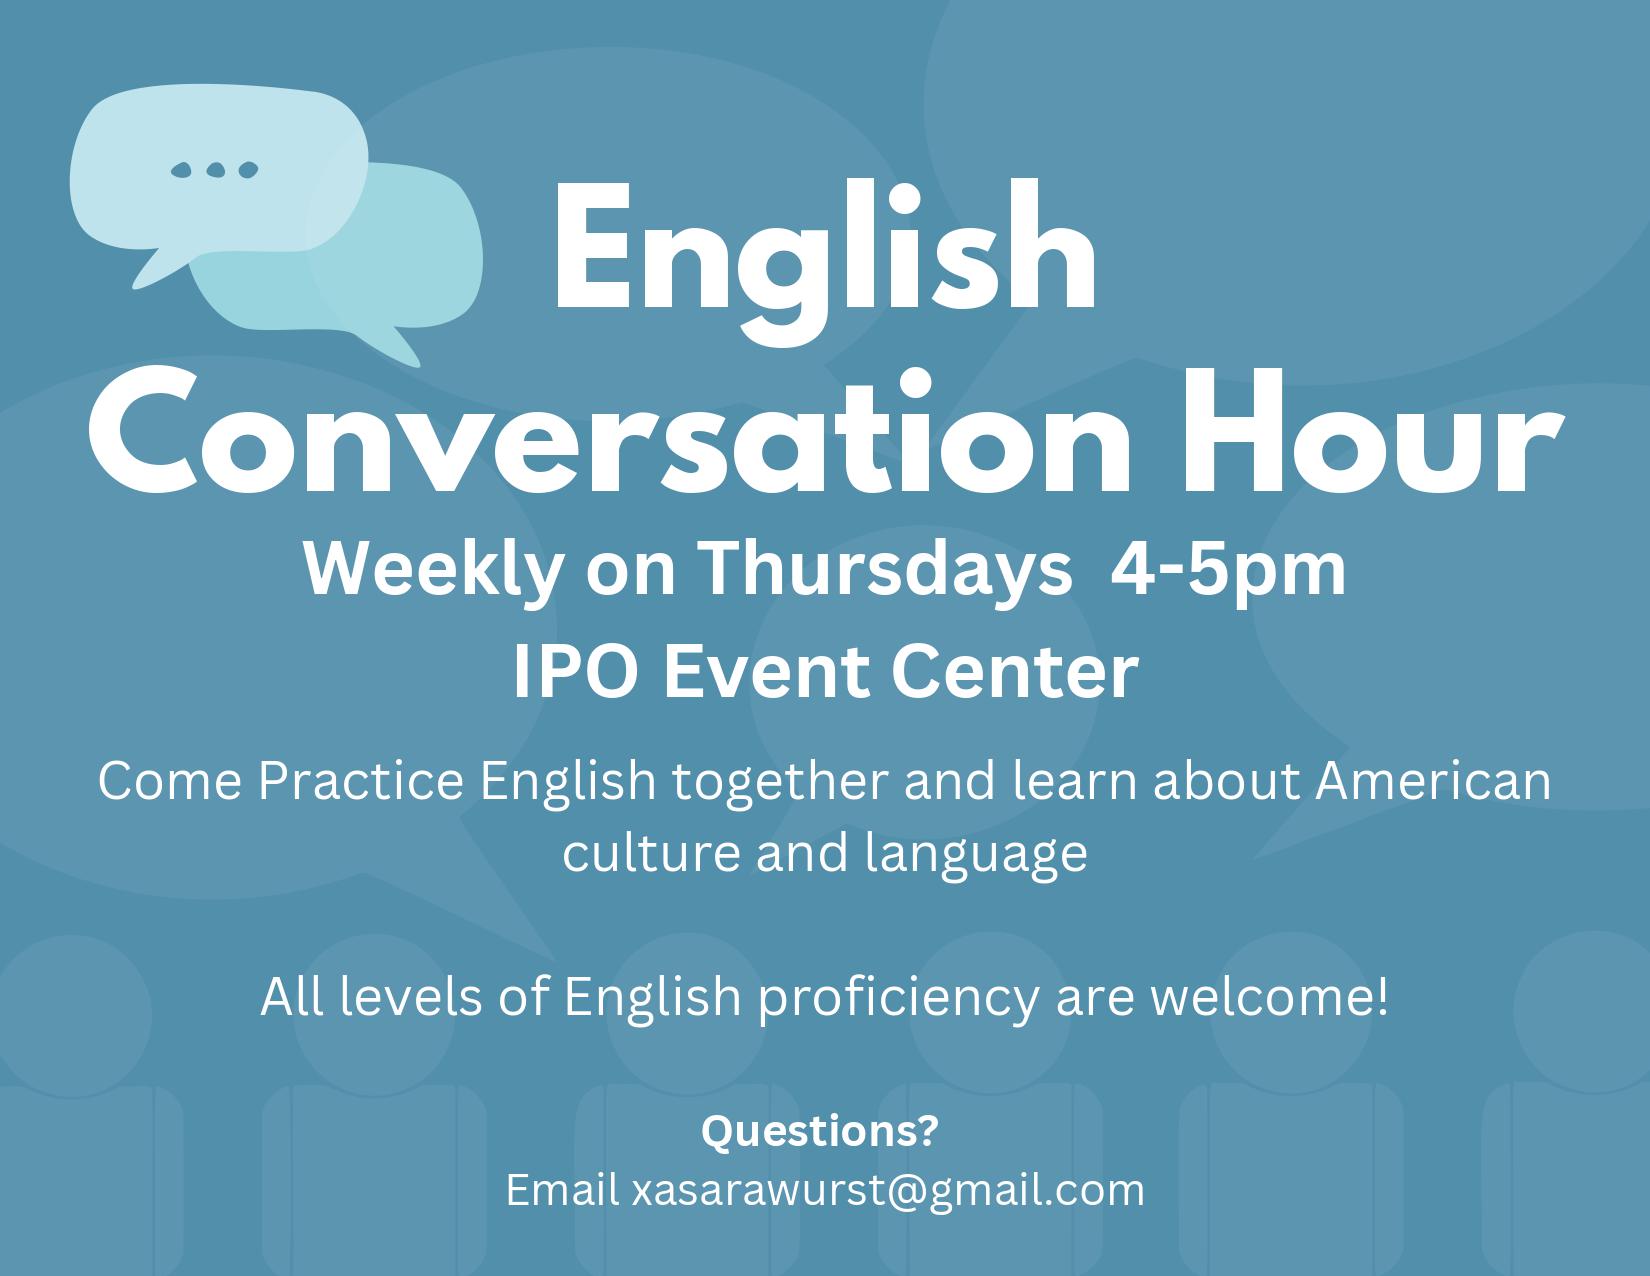 Practice English together and learn about American culture and language at English Conversation Hour. This is weekly on Thursdays from 4-5pm at the IPO Event Center. All levels of English proficiency are welcome! If you have any questions, please email xasarawurst@gmail.com